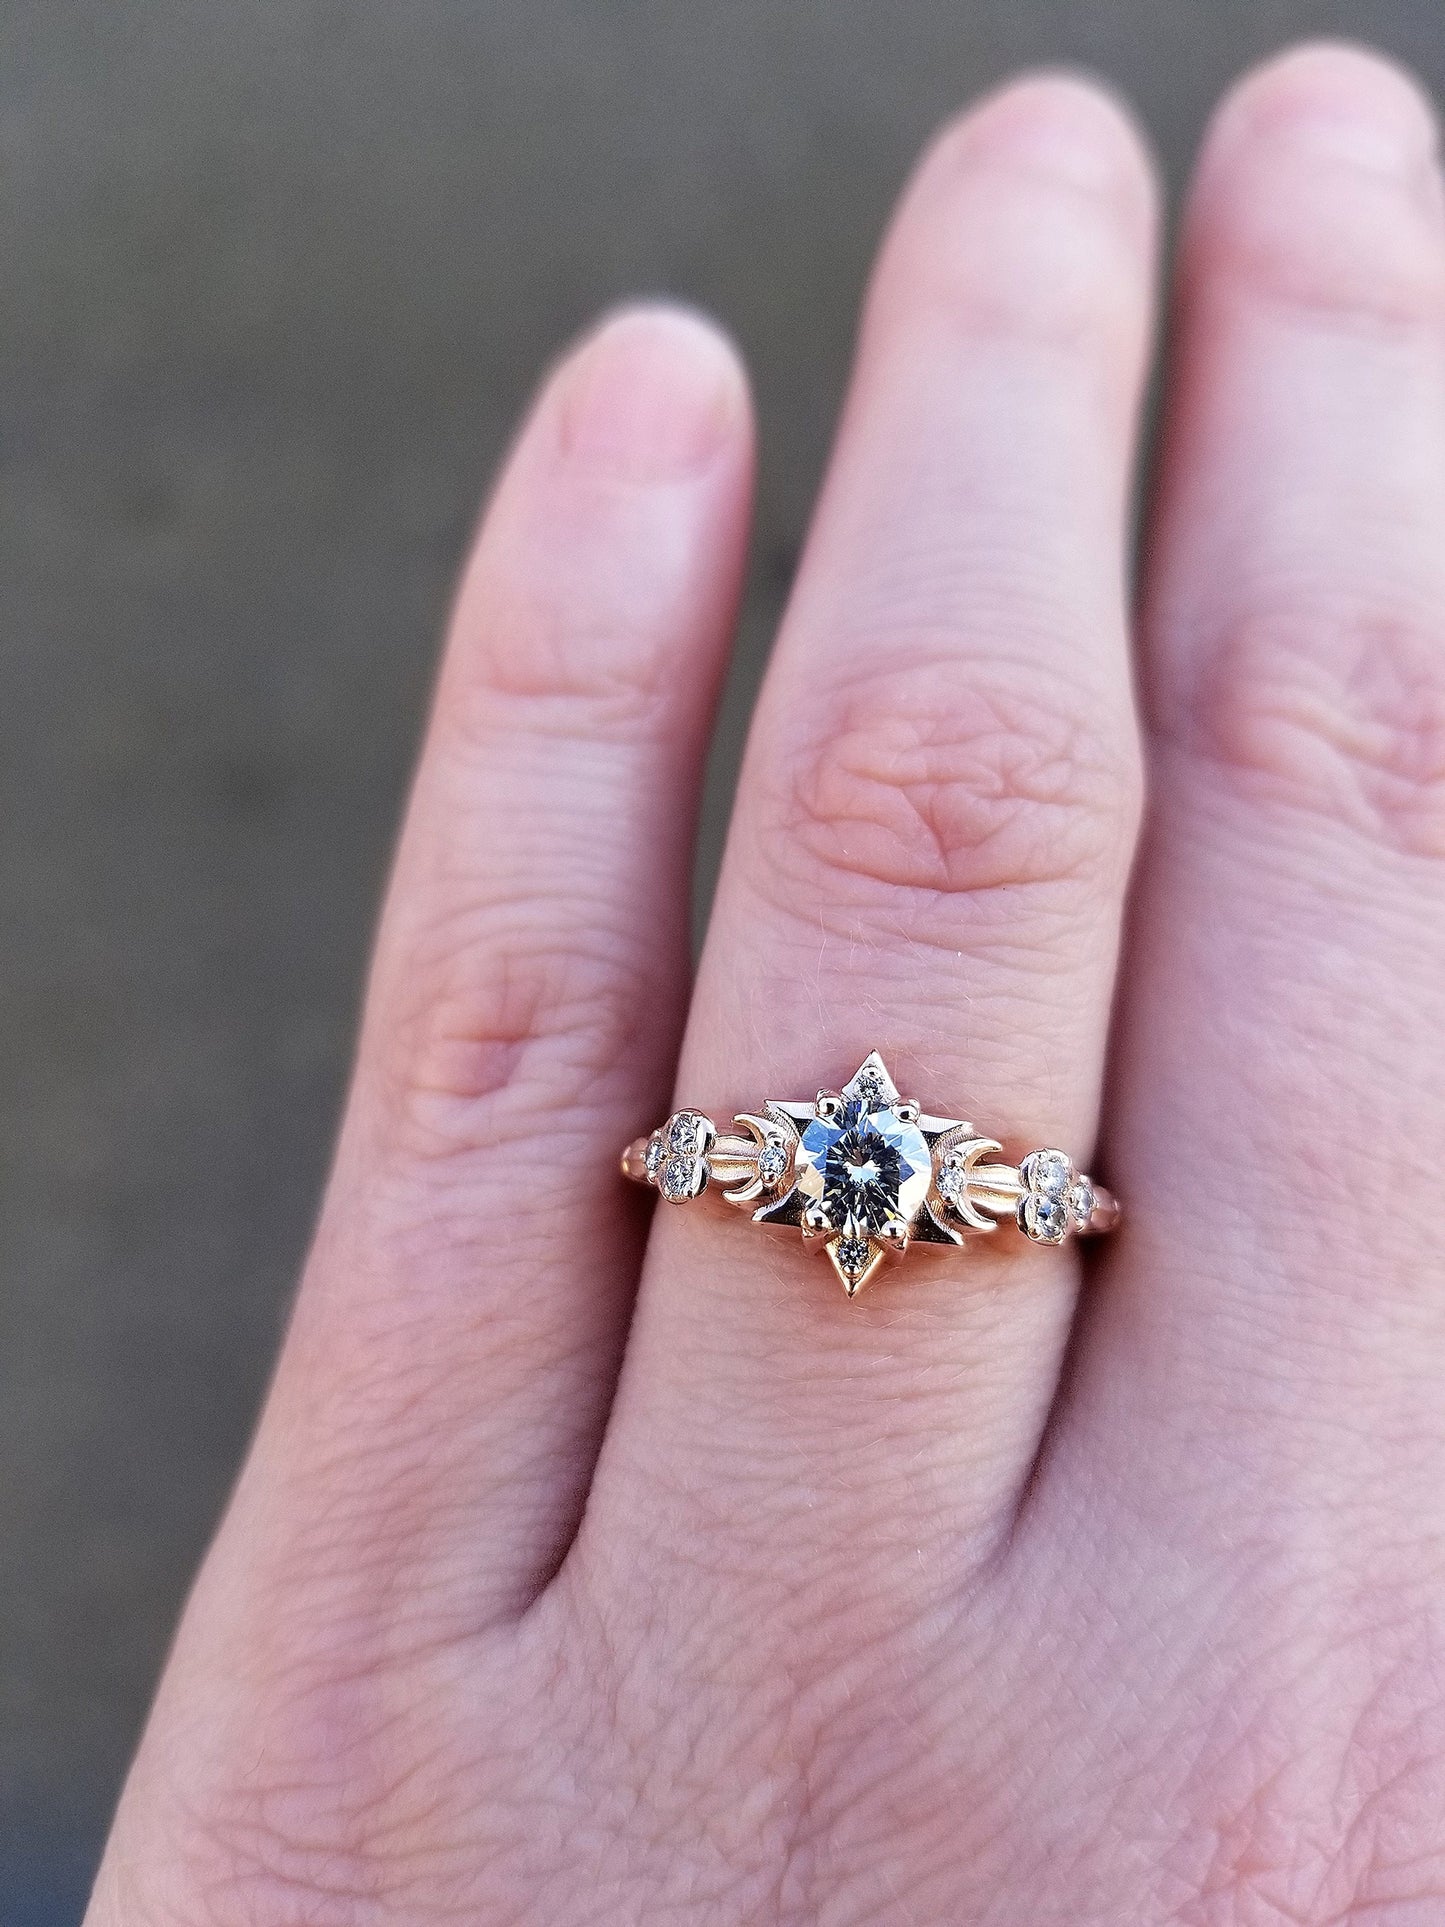 Load image into Gallery viewer, Celestial Engagement Ring - Stars Clouds and Crescent Moons - Pick Your Center Stone - Custom Modern Lunar Diamond Gold Ring
